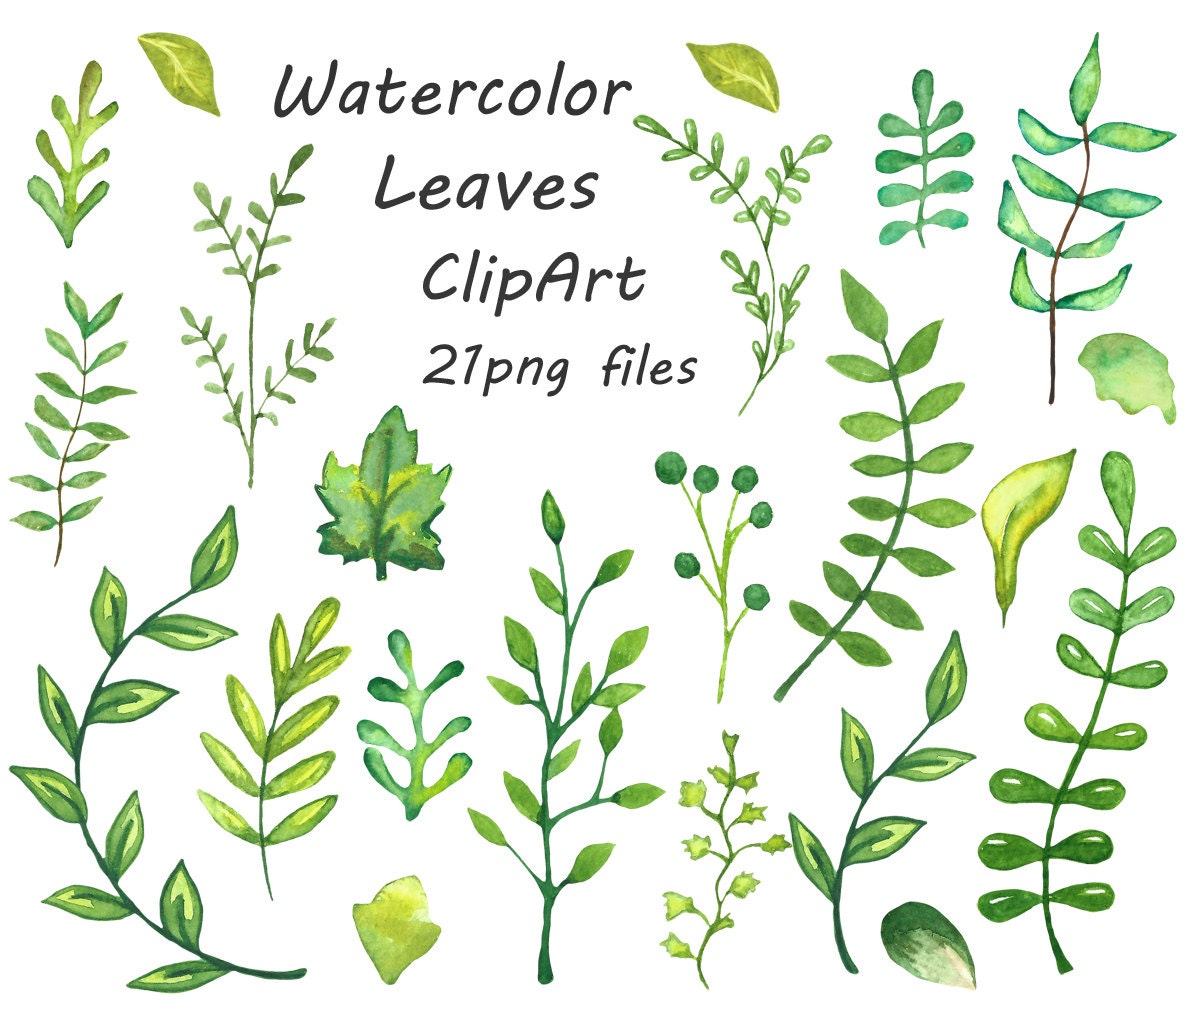 watercolor leaves clipart - photo #1